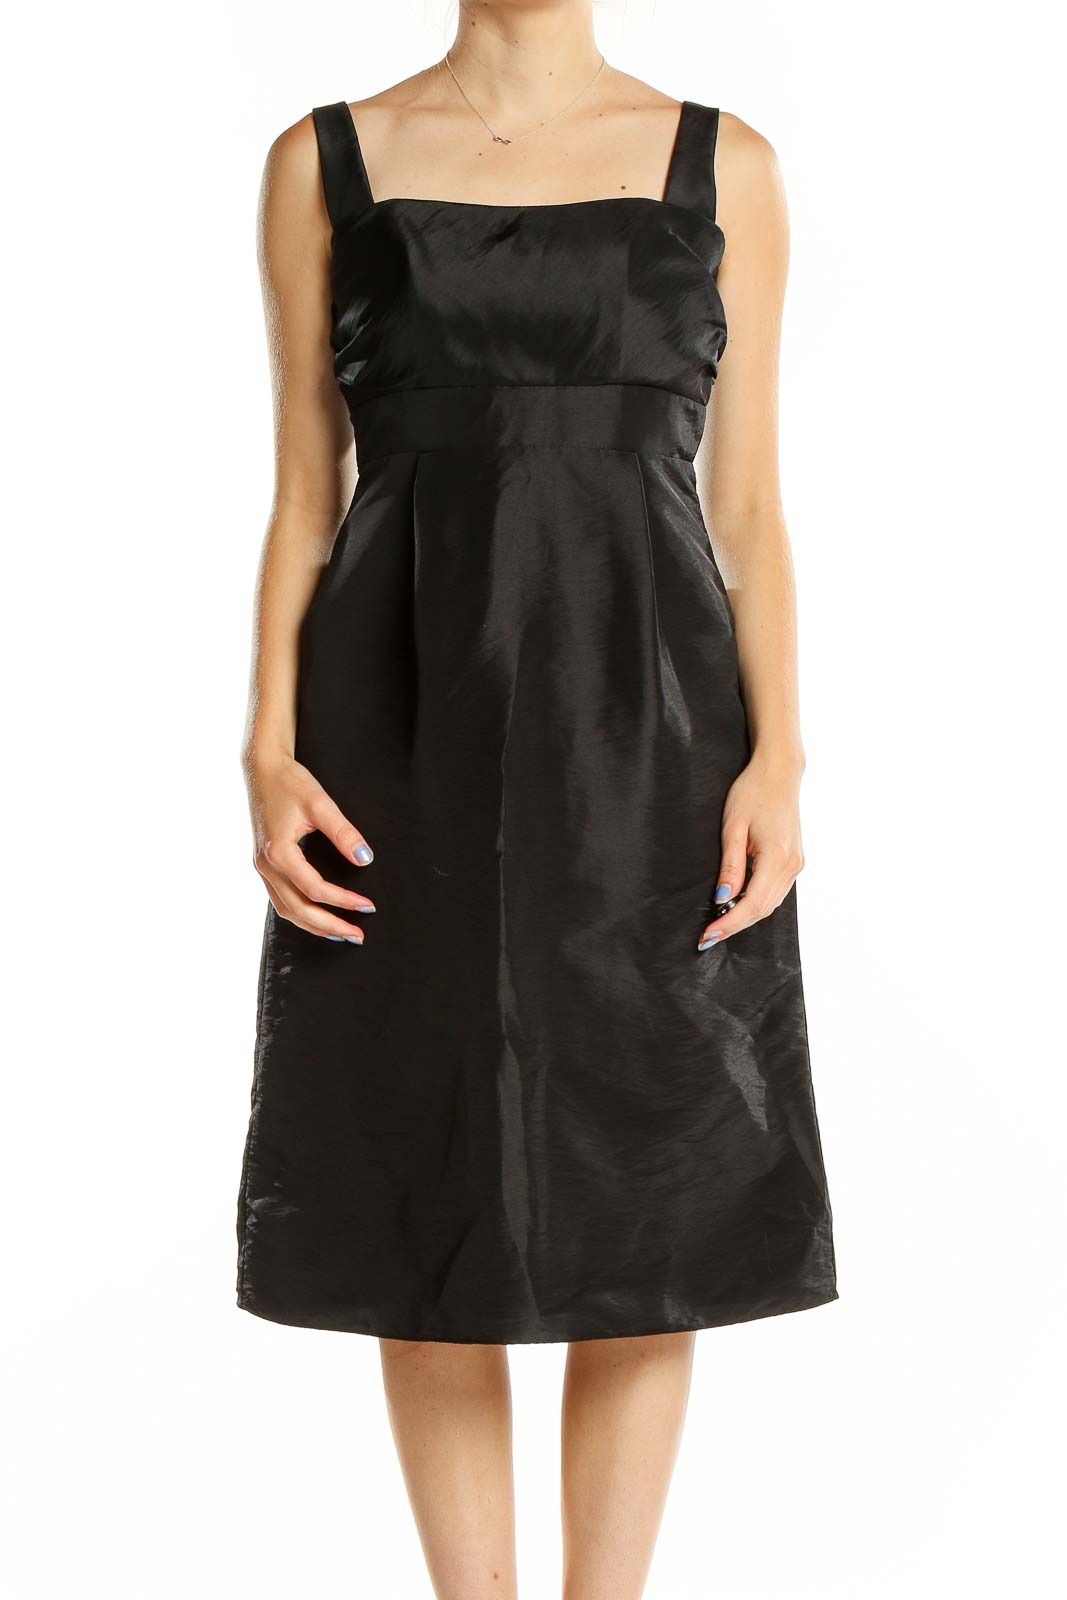 Black Pinafore Classic Solid Dress Front